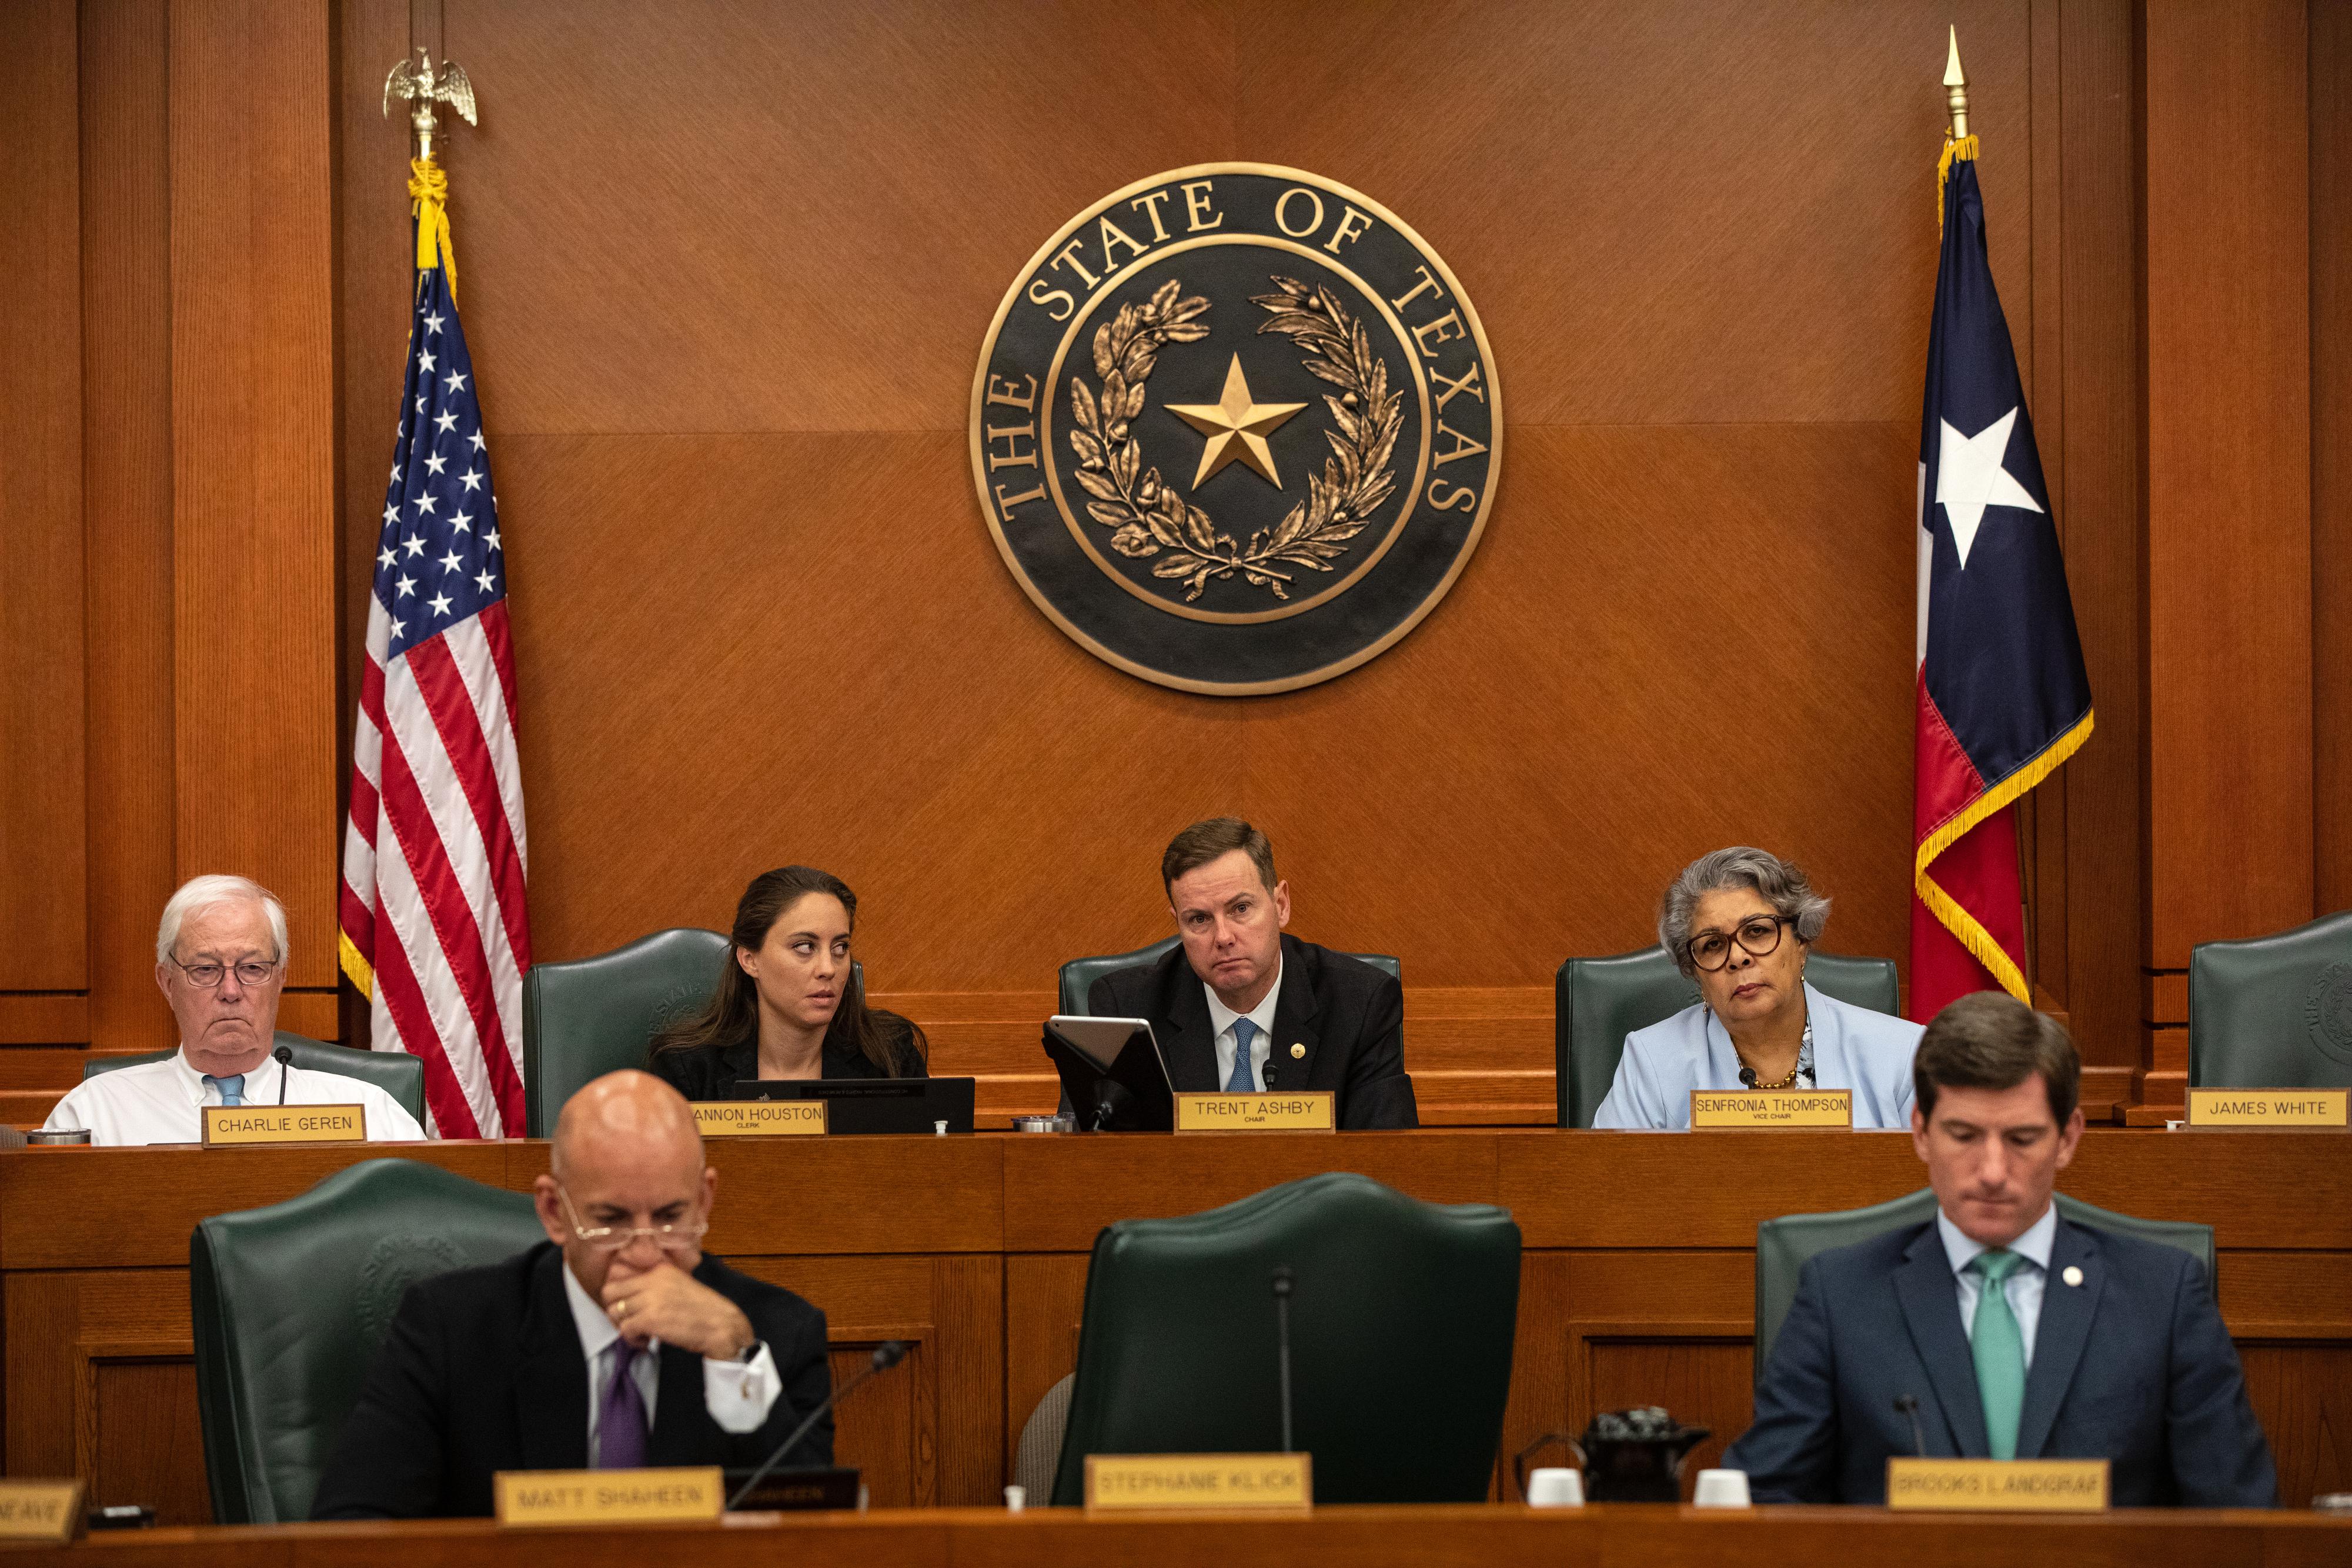 State legislators sit in two raised rows in a committee hearing room in front of American and Texas flags, with the state seal centered on the wall behind them.